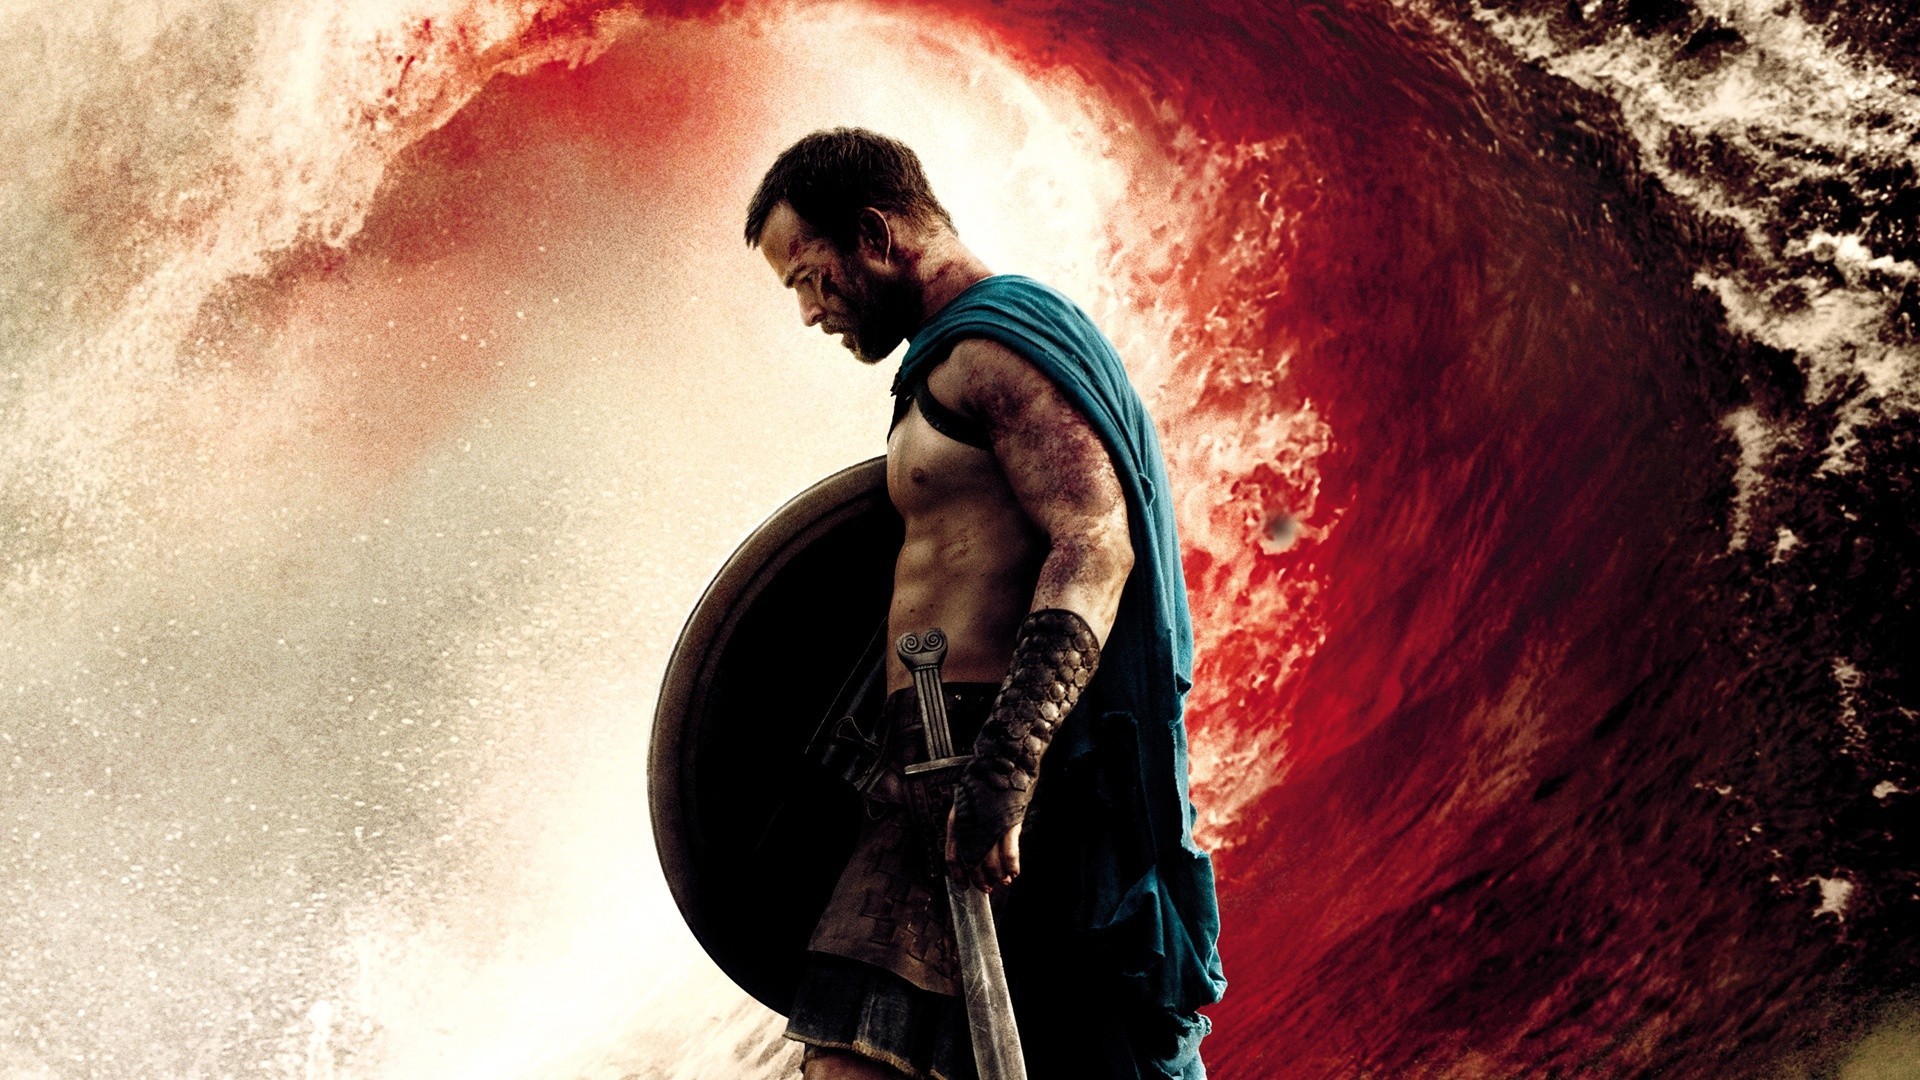 People 1920x1080 300: Rise of an Empire movies Spartans warrior shield soldier blood sword men